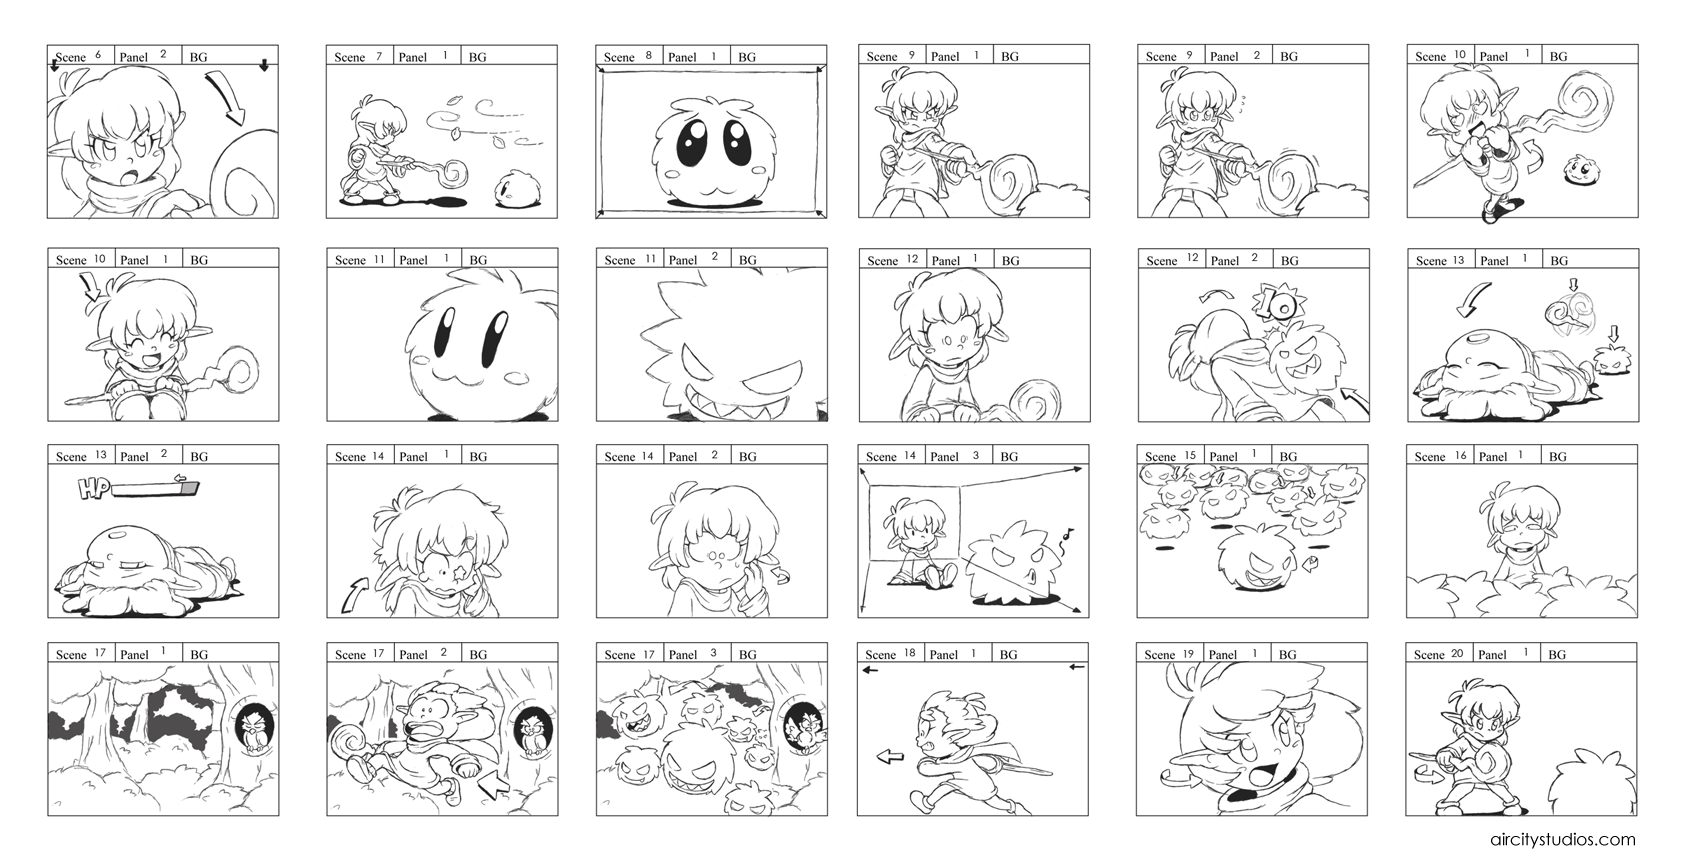 Level 1 Storyboard Samples by Air City on DeviantArt